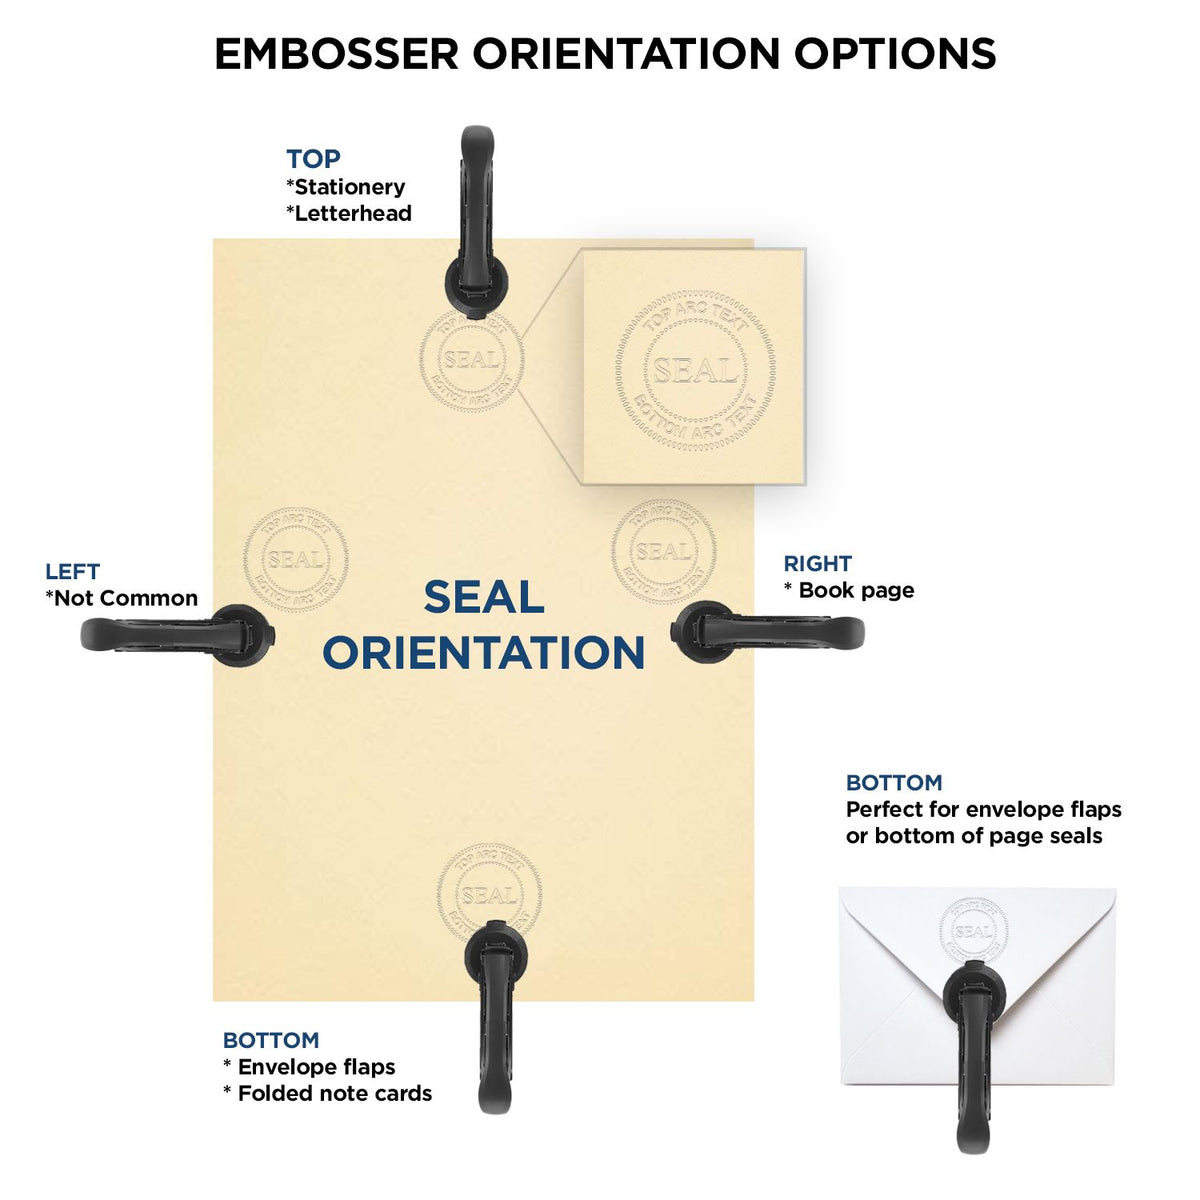 An infographic for the Long Reach Arkansas PE Seal showing embosser orientation, this is showing examples of a top, bottom, right and left insert.